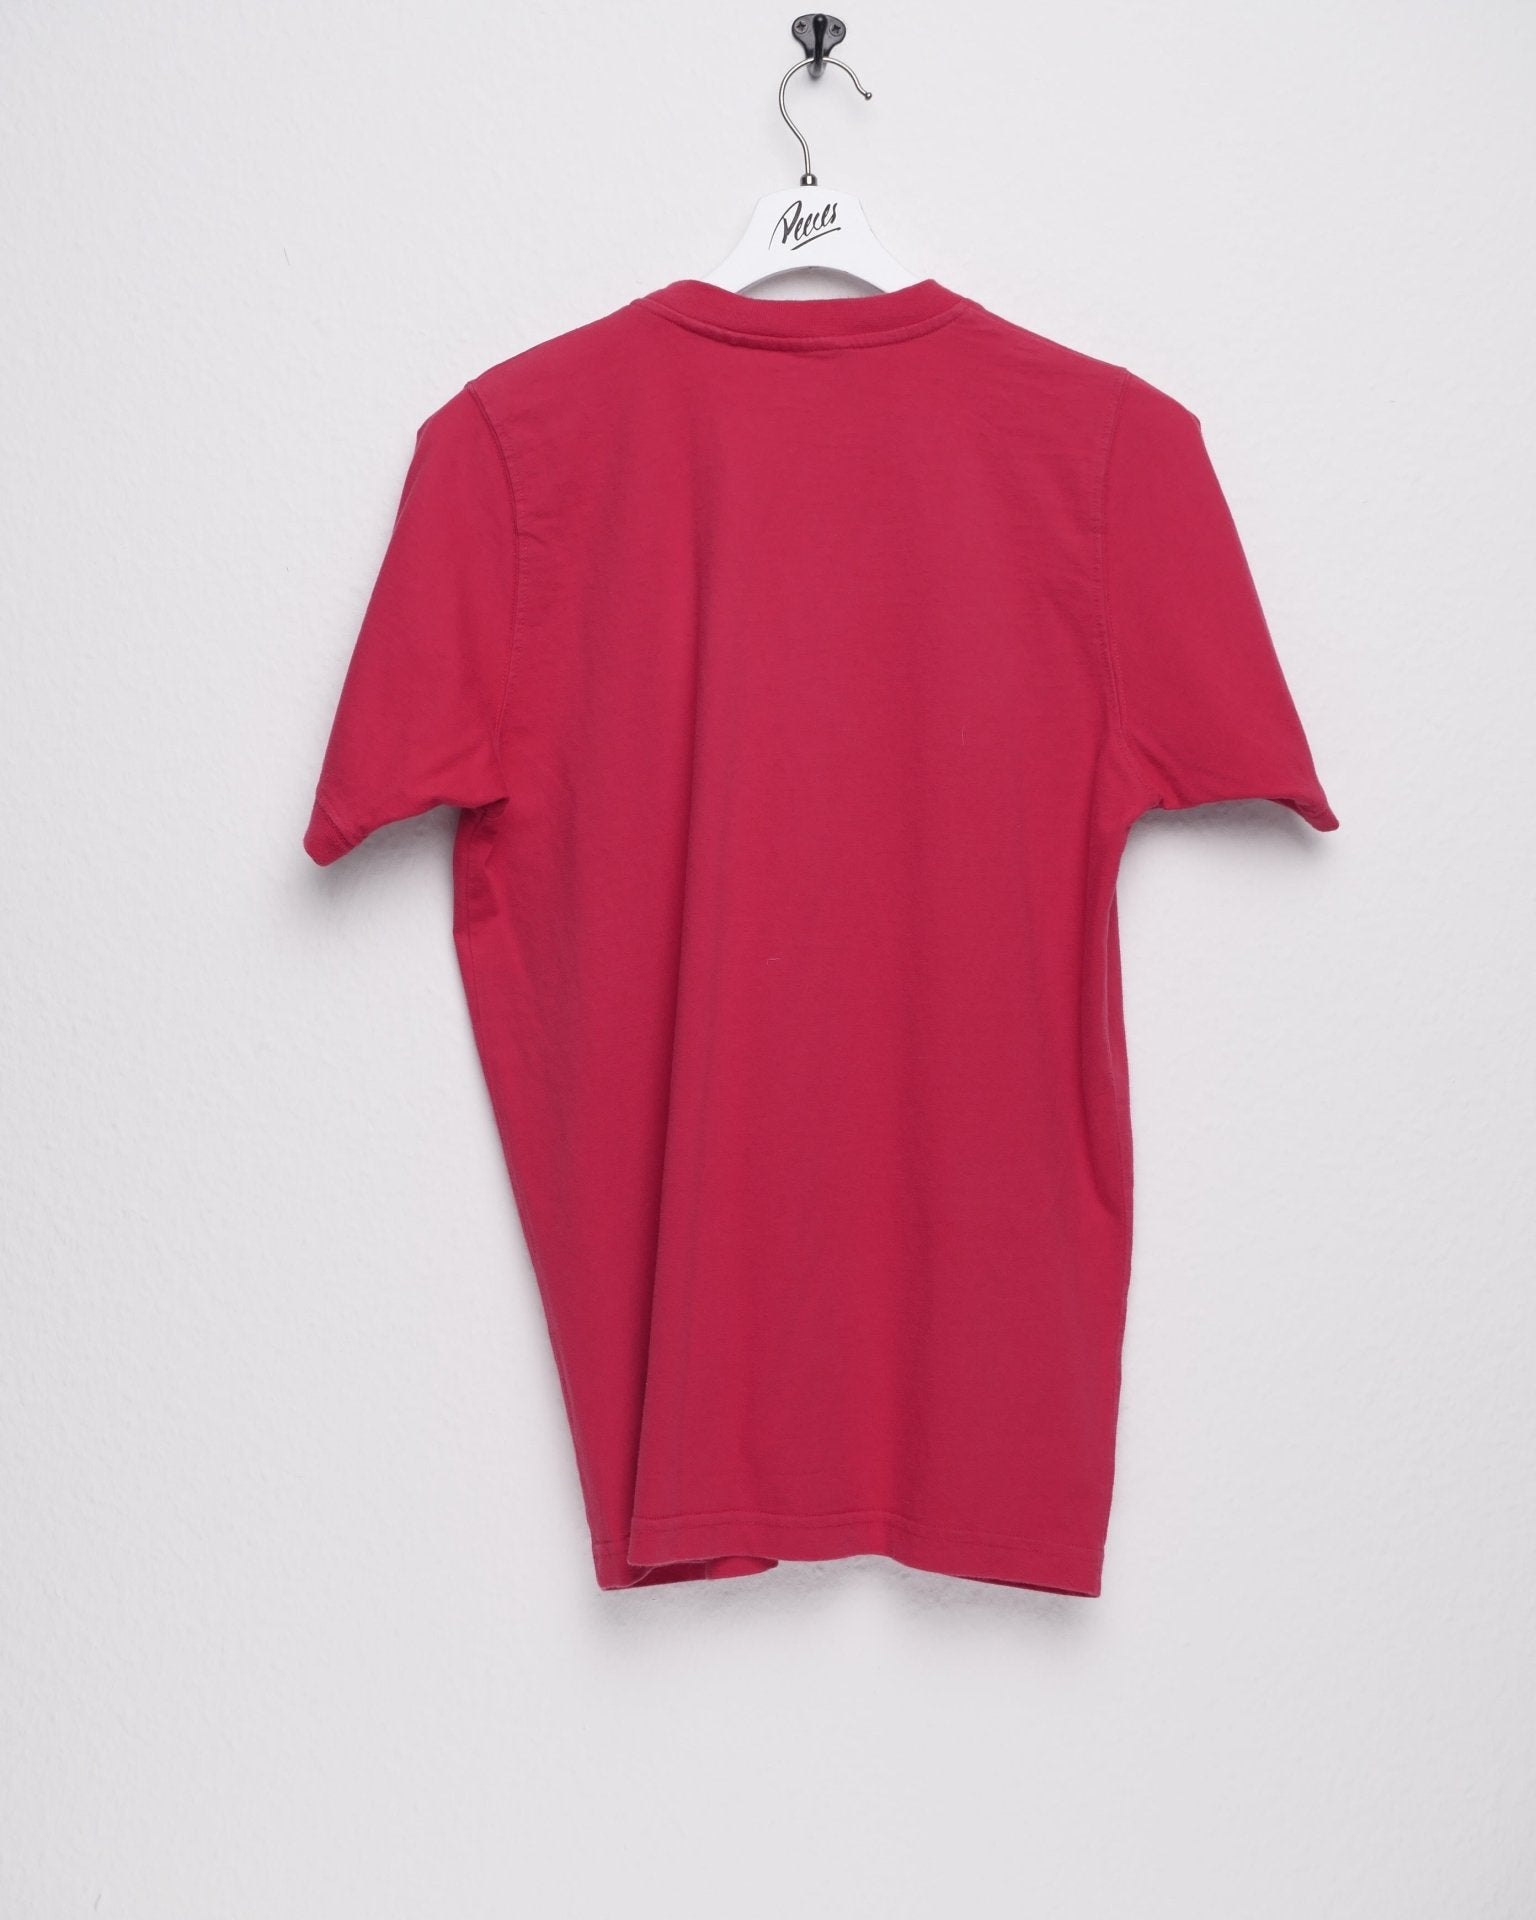 adidas embroidered Logo red Shirt - Peeces